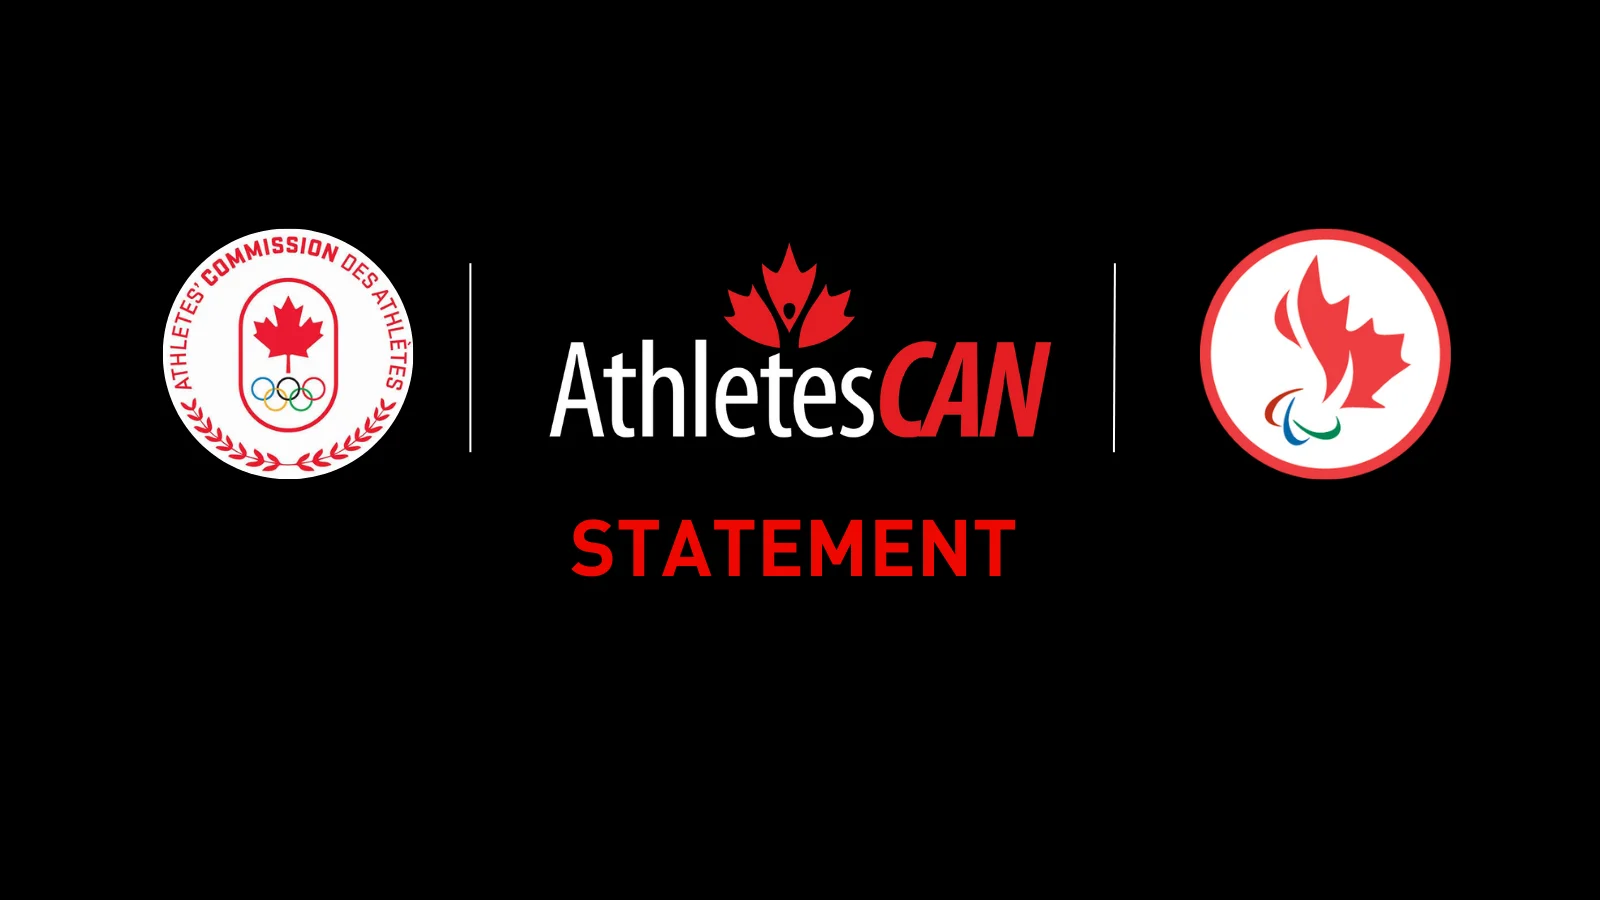 AthletesCAN, COC AC and CPC AC logos